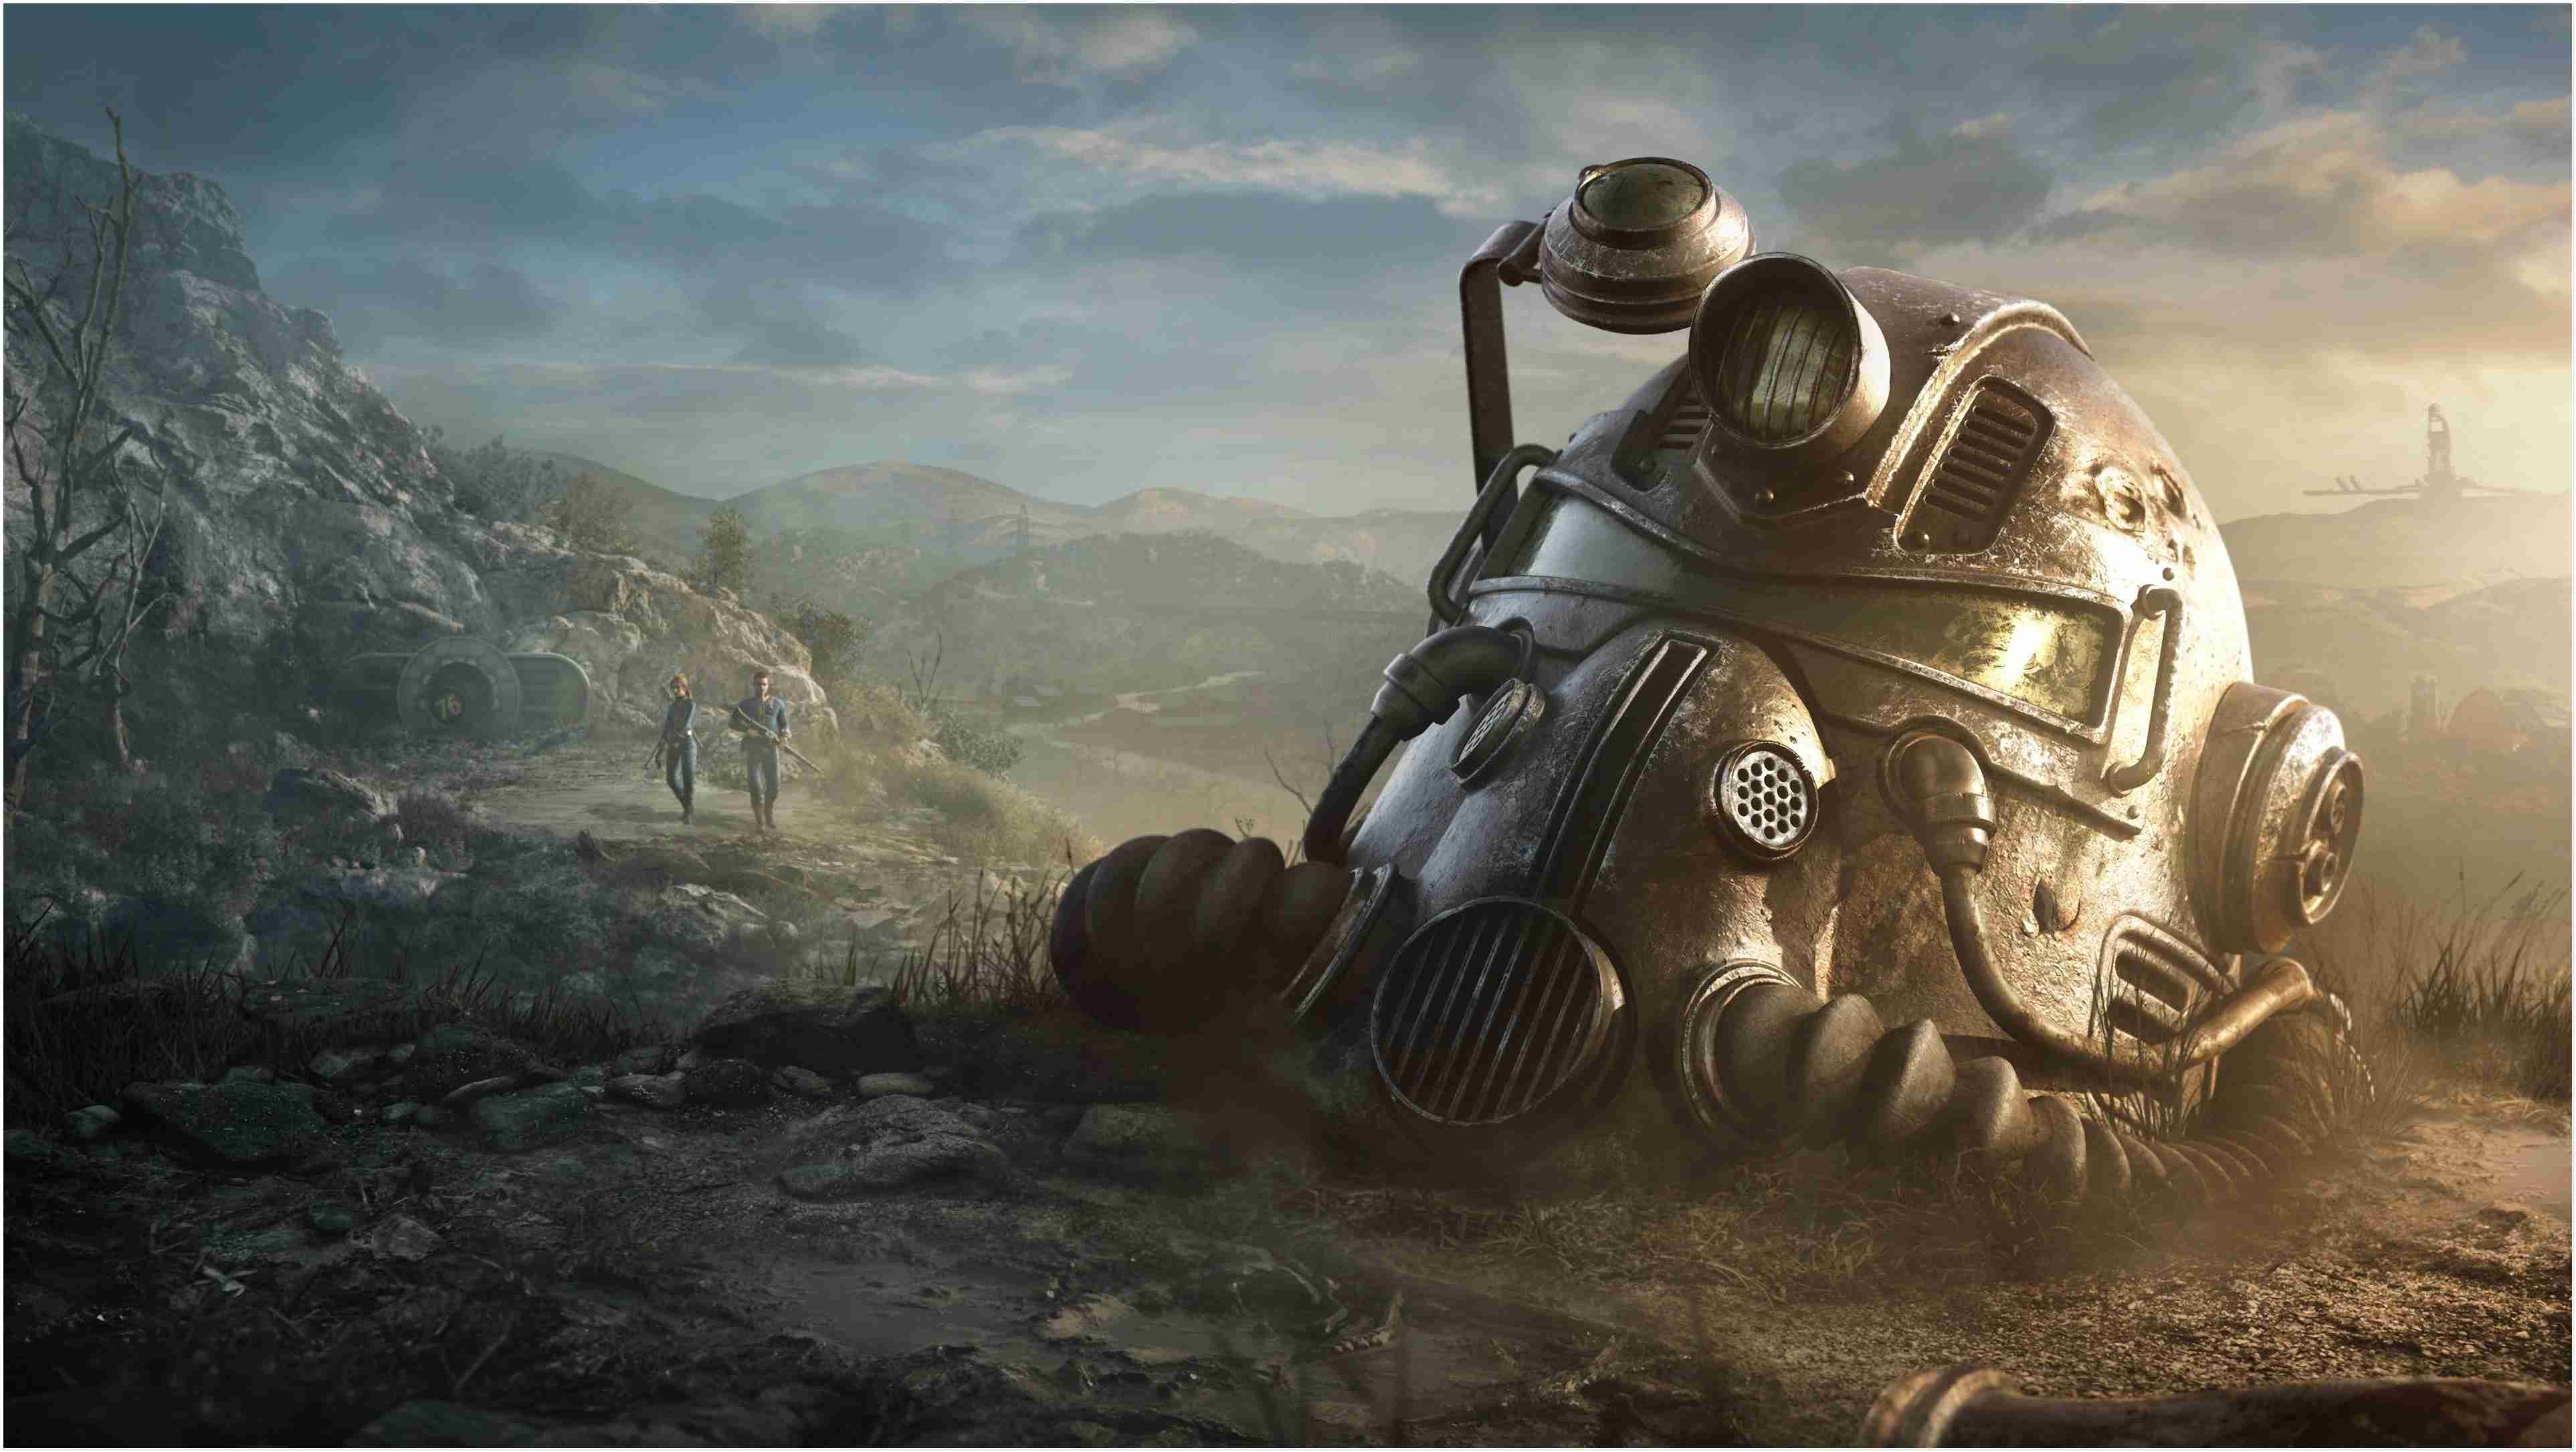 Fallout 4 phone wallpaper 1080P 2k 4k Full HD Wallpapers Backgrounds  Free Download  Wallpaper Crafter